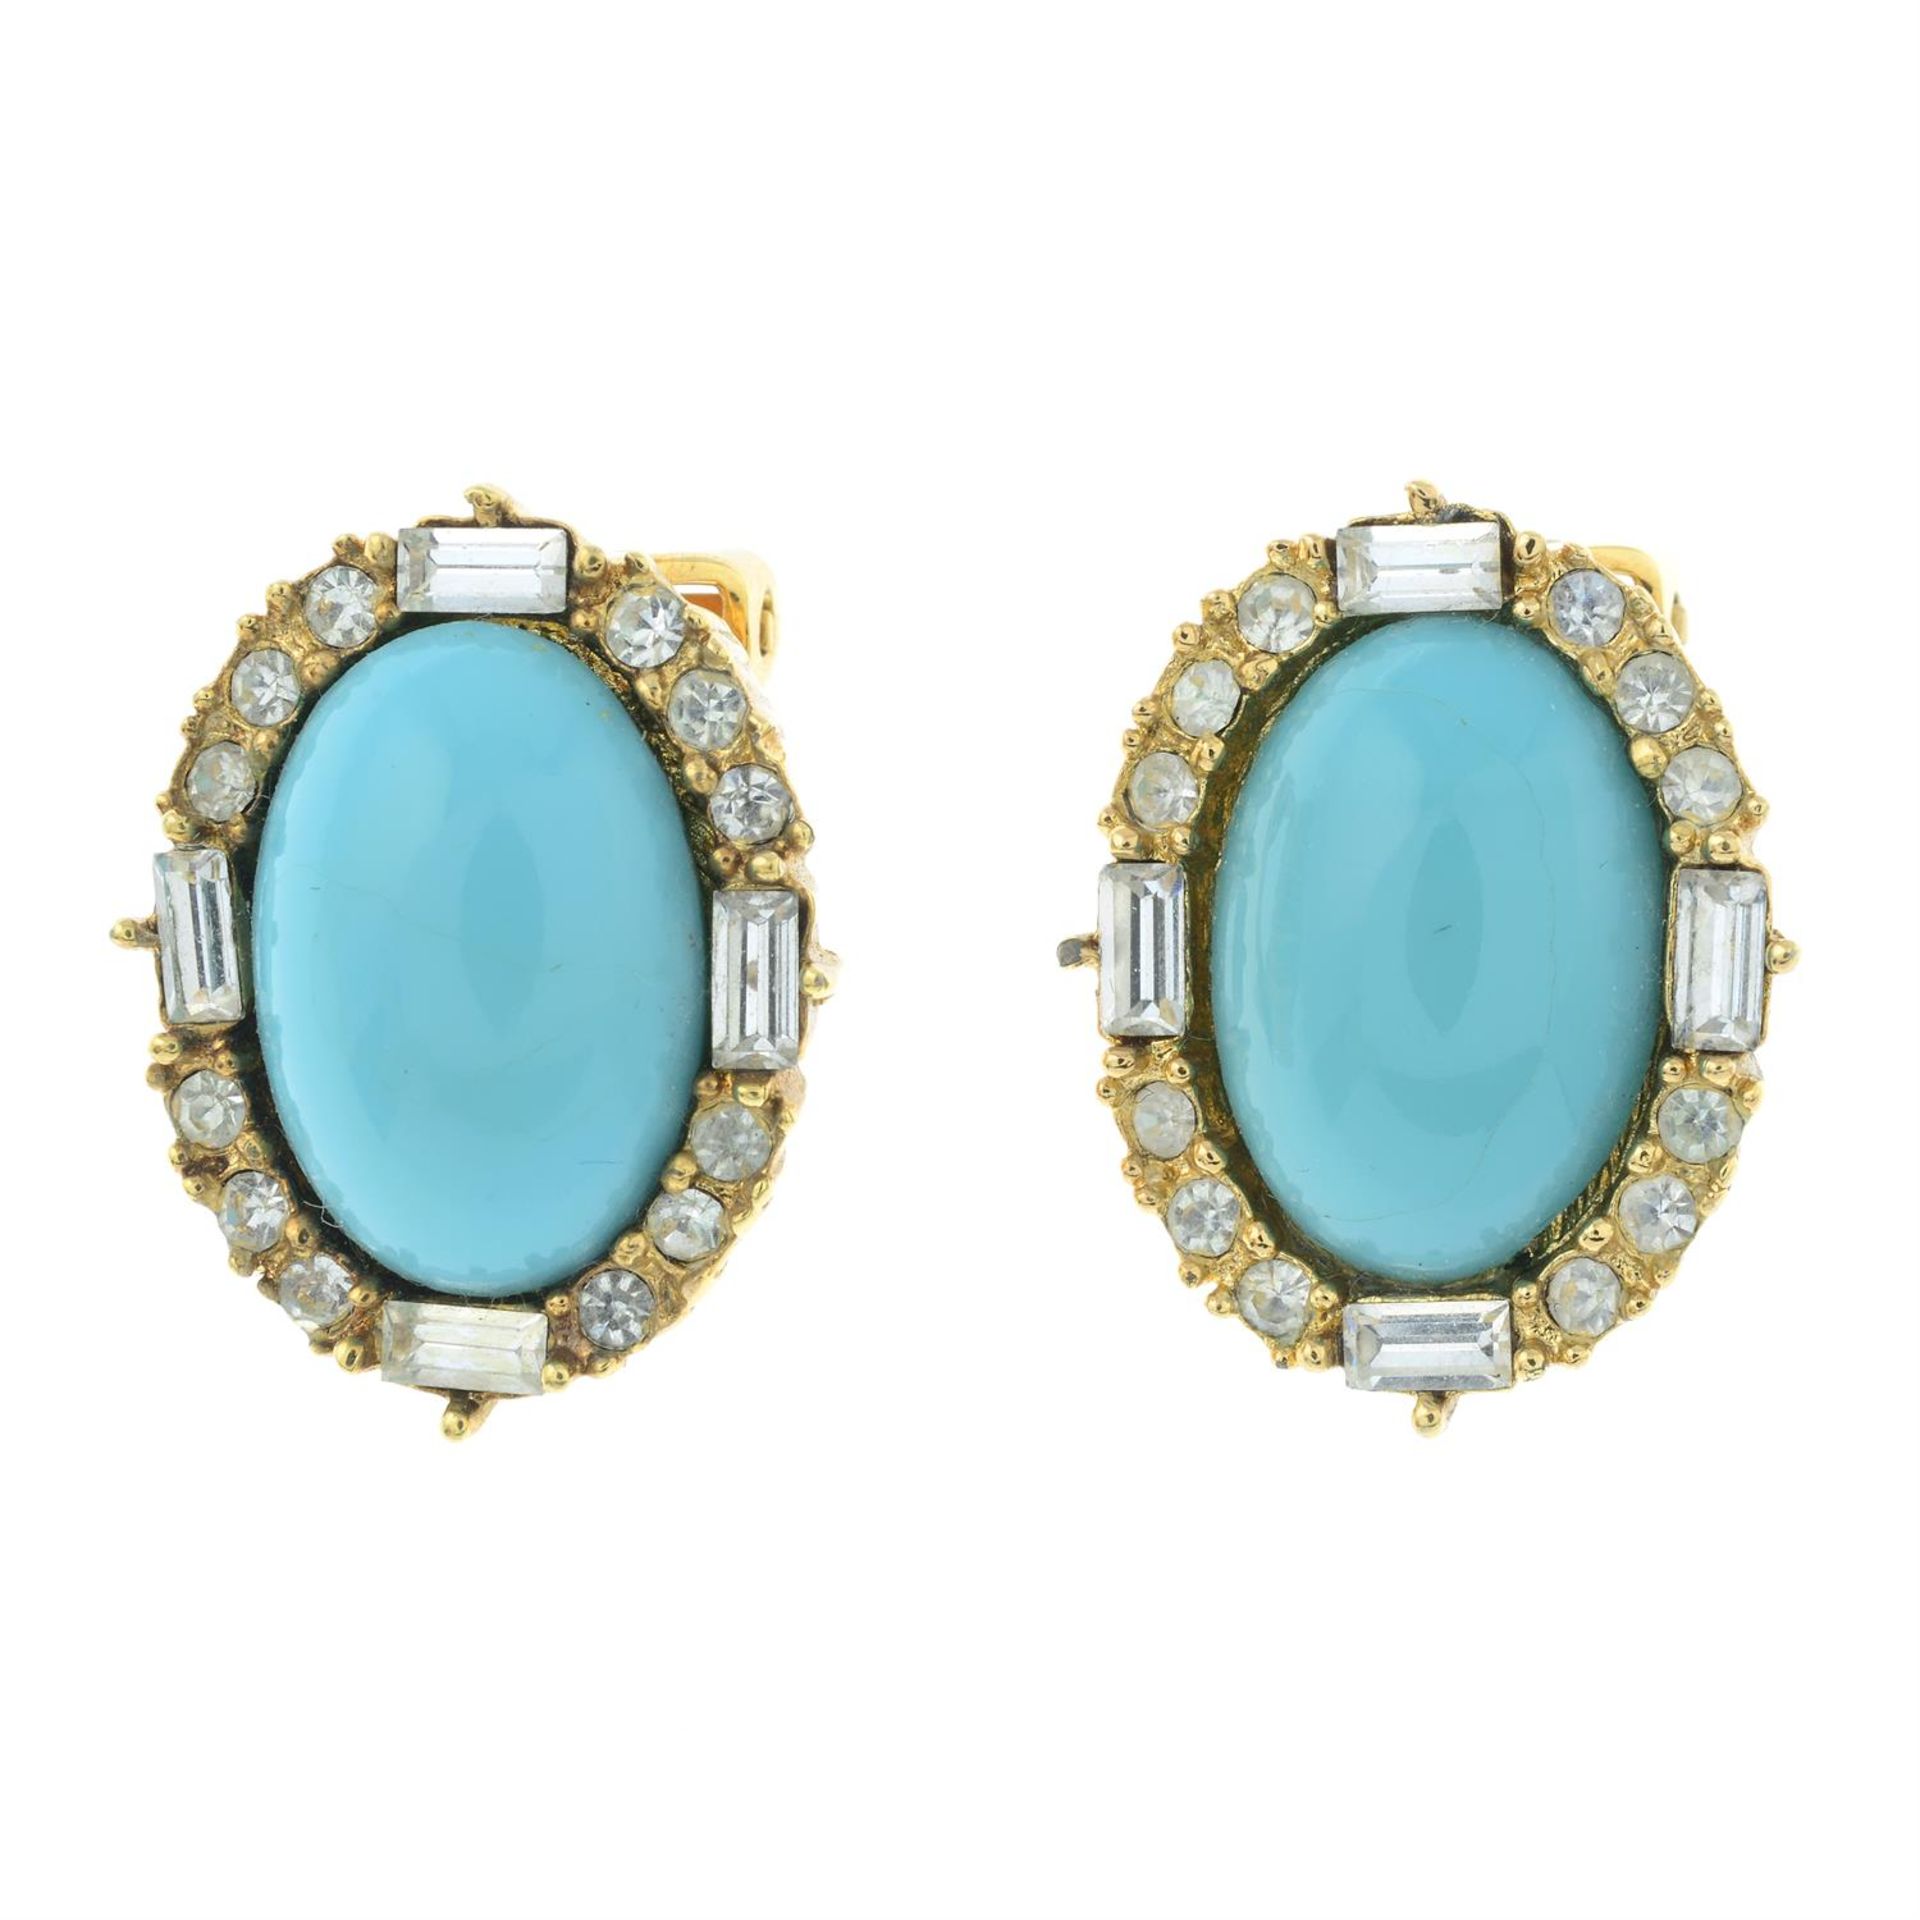 CHRISTIAN DIOR - a pair of blue paste earrings.